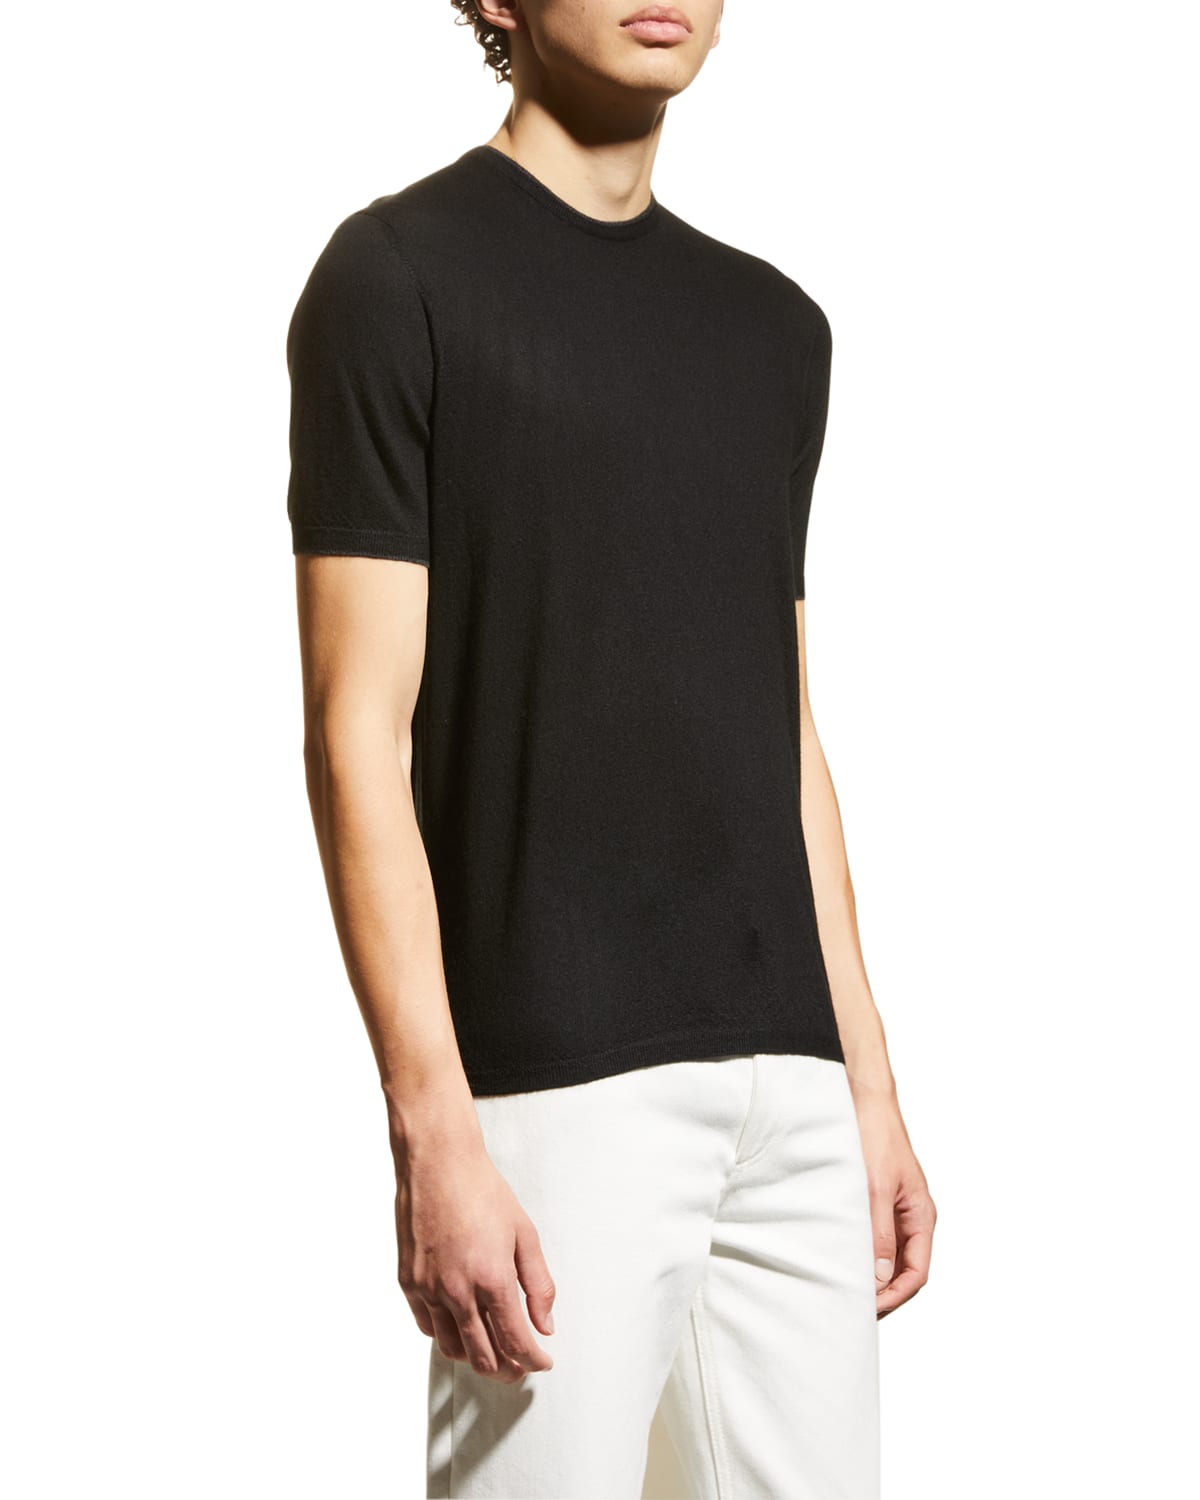 Nomad Men's Cashmere T-shirt W/ Tipping In Grey/ivory